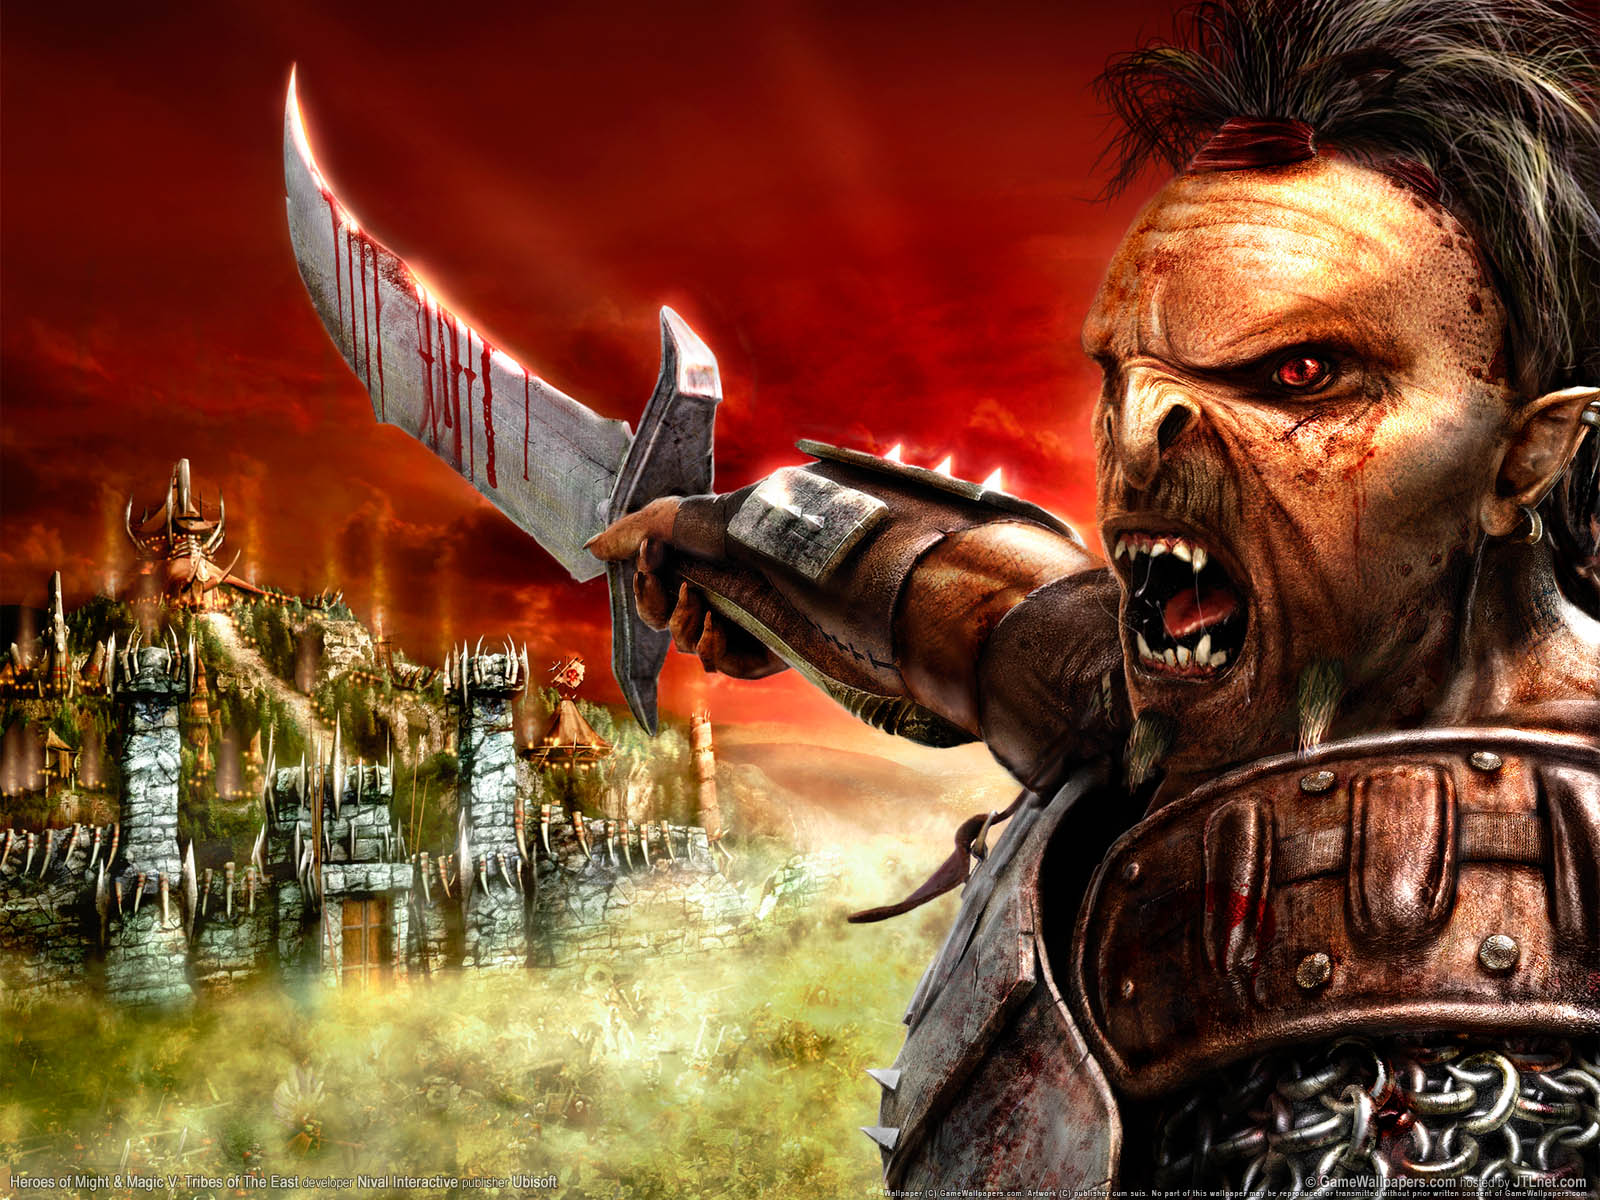 Heroes of Might %2526 Magic 5%253A Tribes of The East wallpaper 01 1600x1200